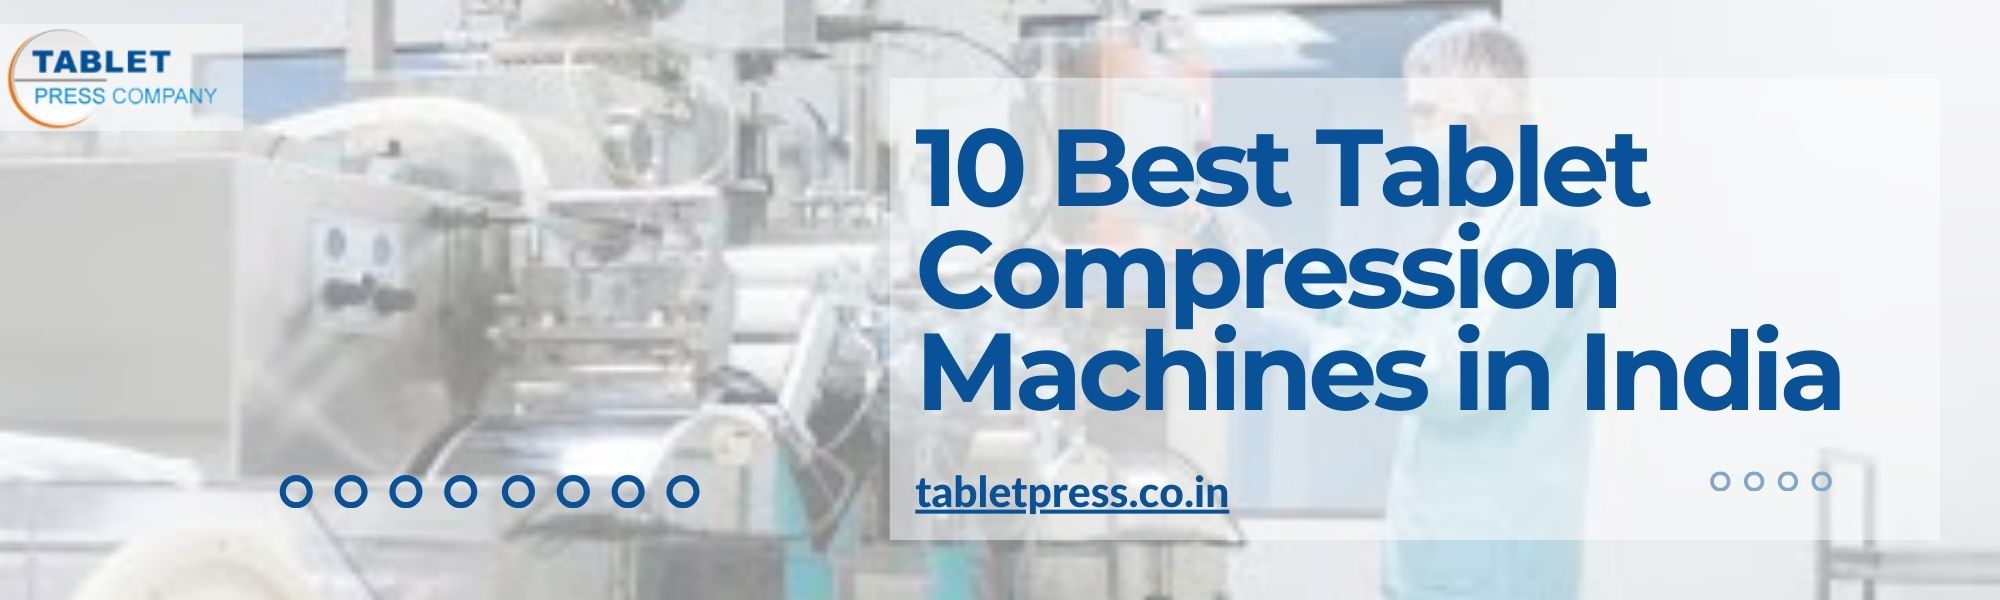 10 Best Tablet Compression Machines in India